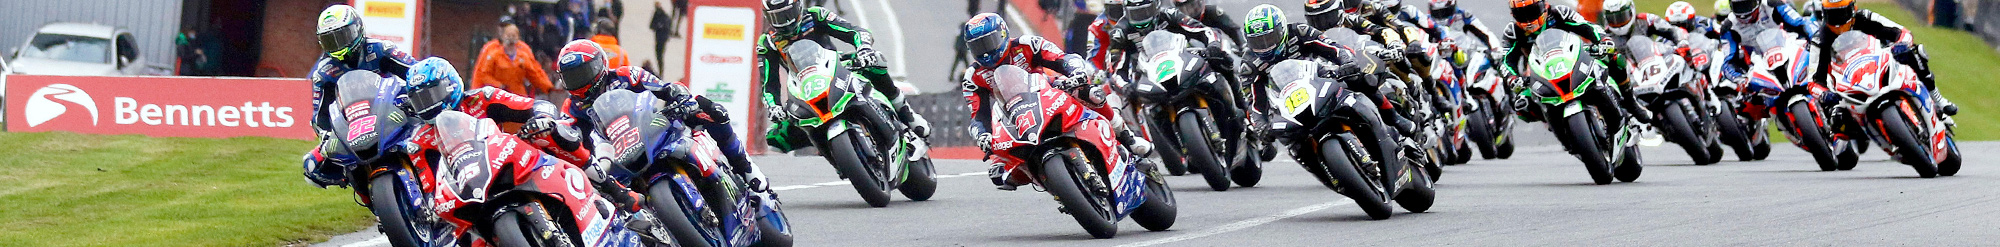 Brookes delivers Brands Hatch masterclass to win ahead of finale 